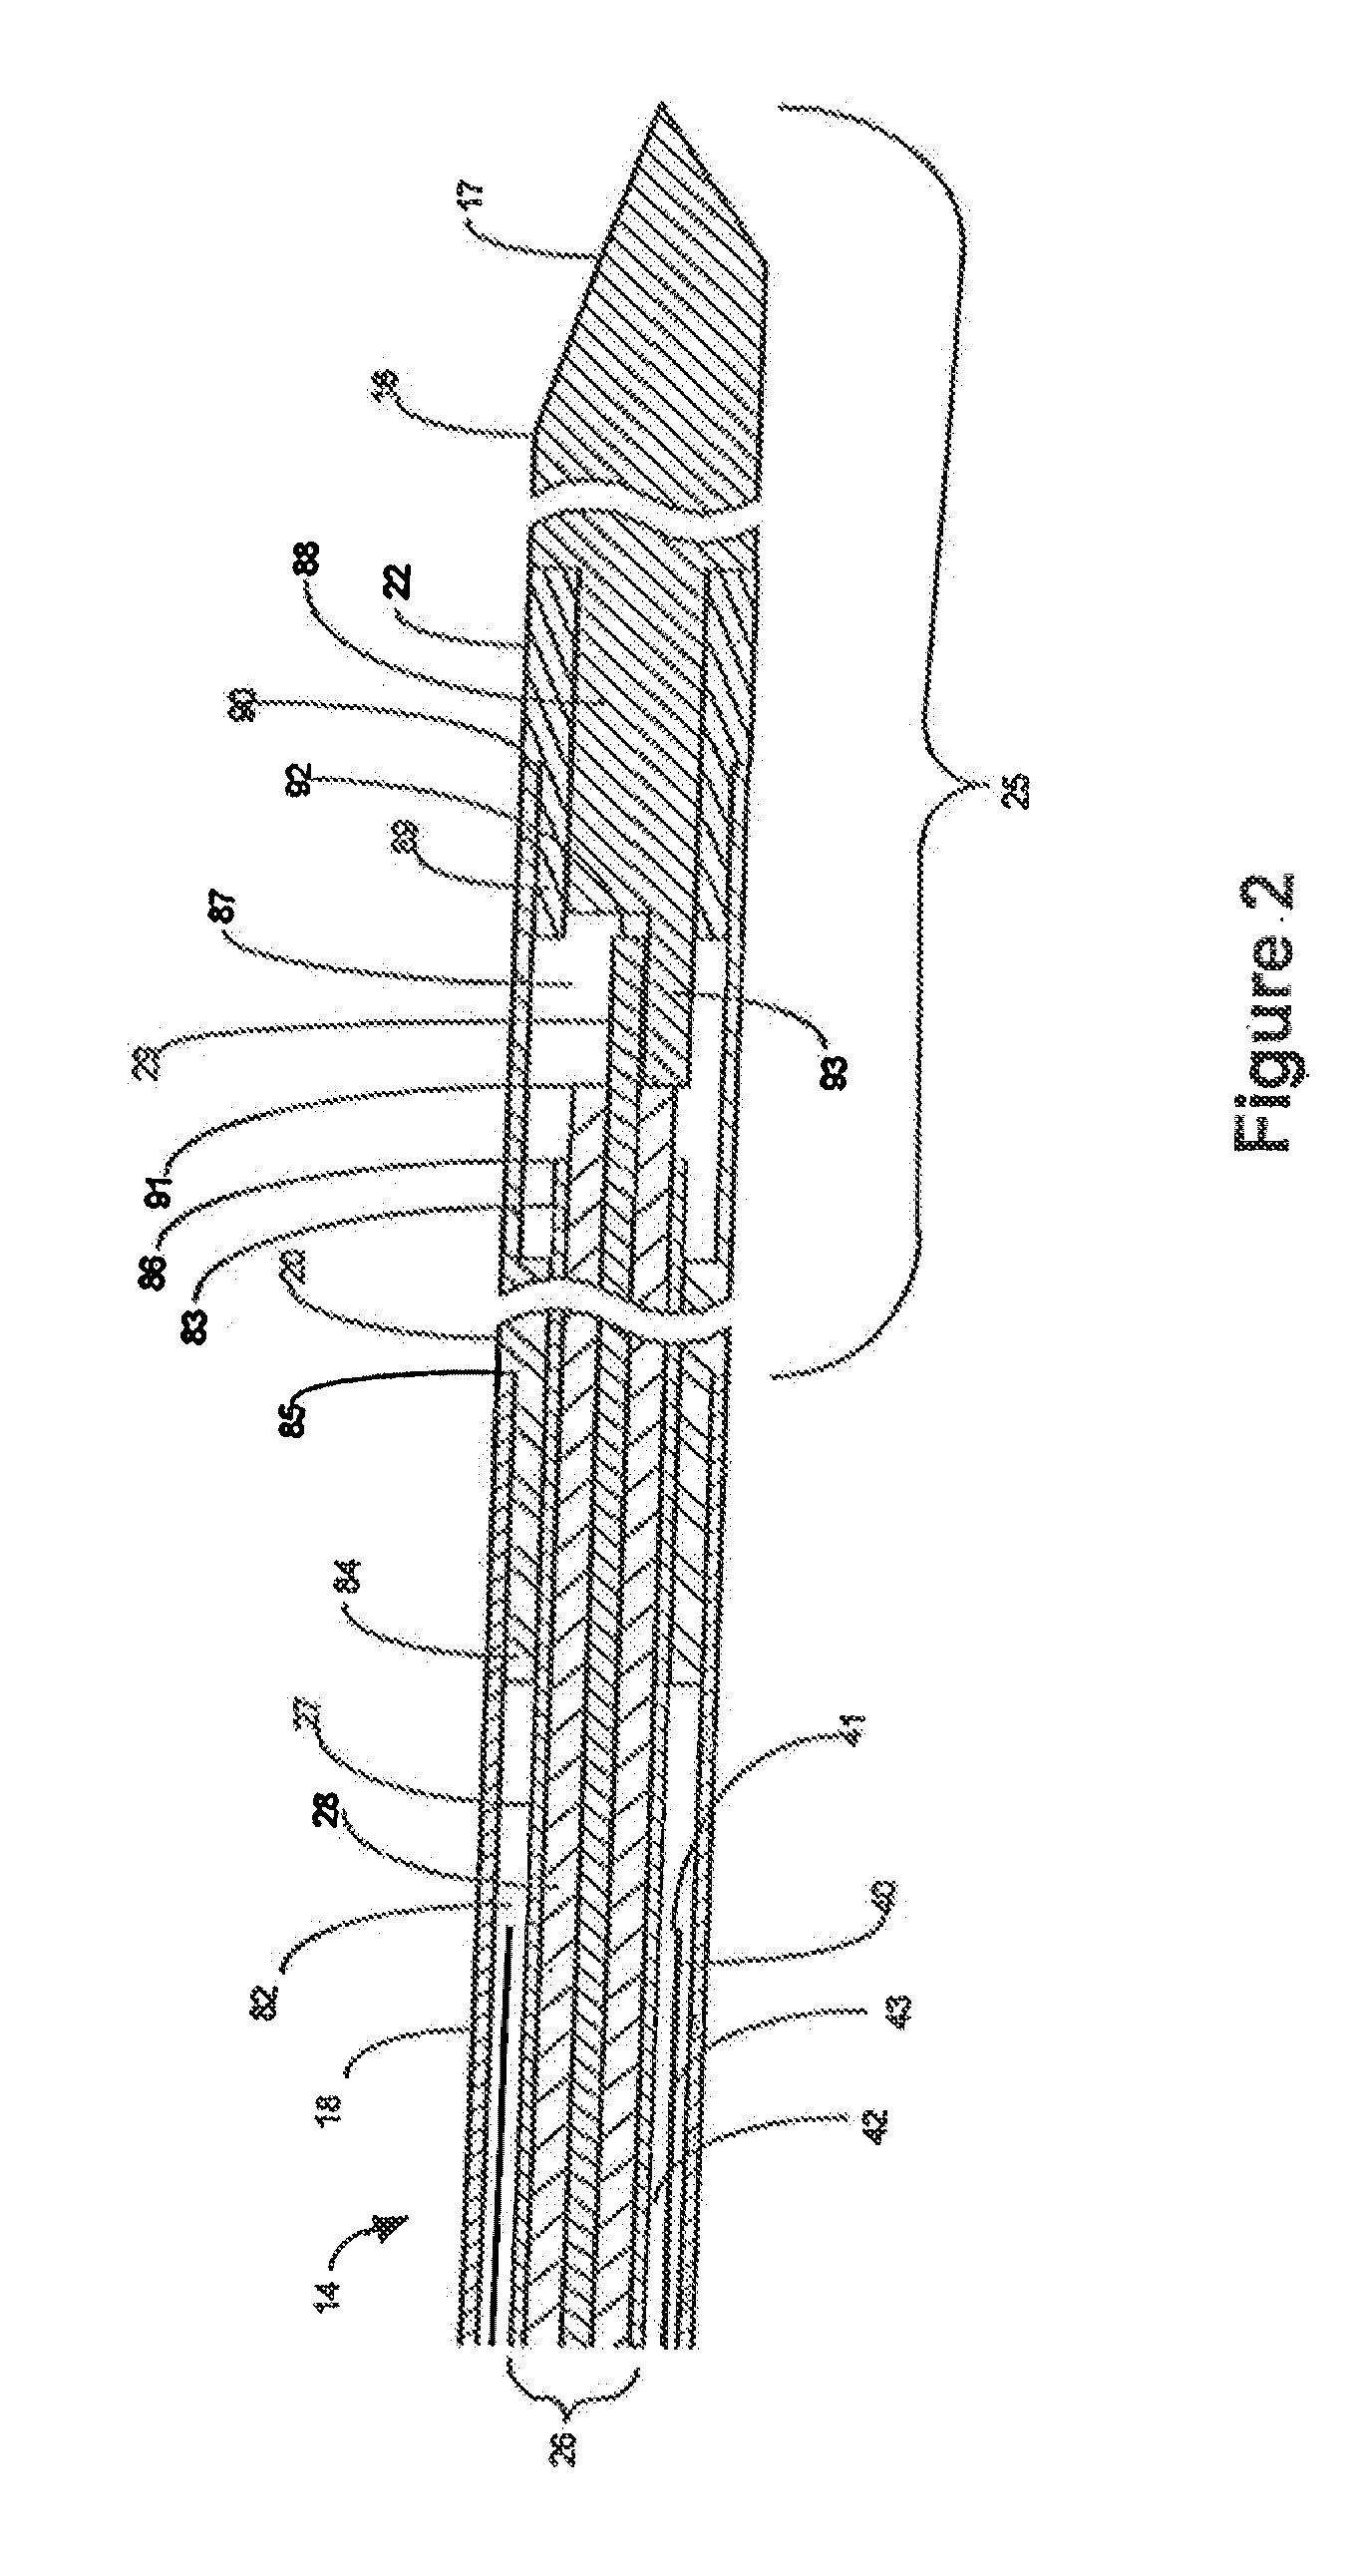 Microwave coagulation applicator and system with fluid injection